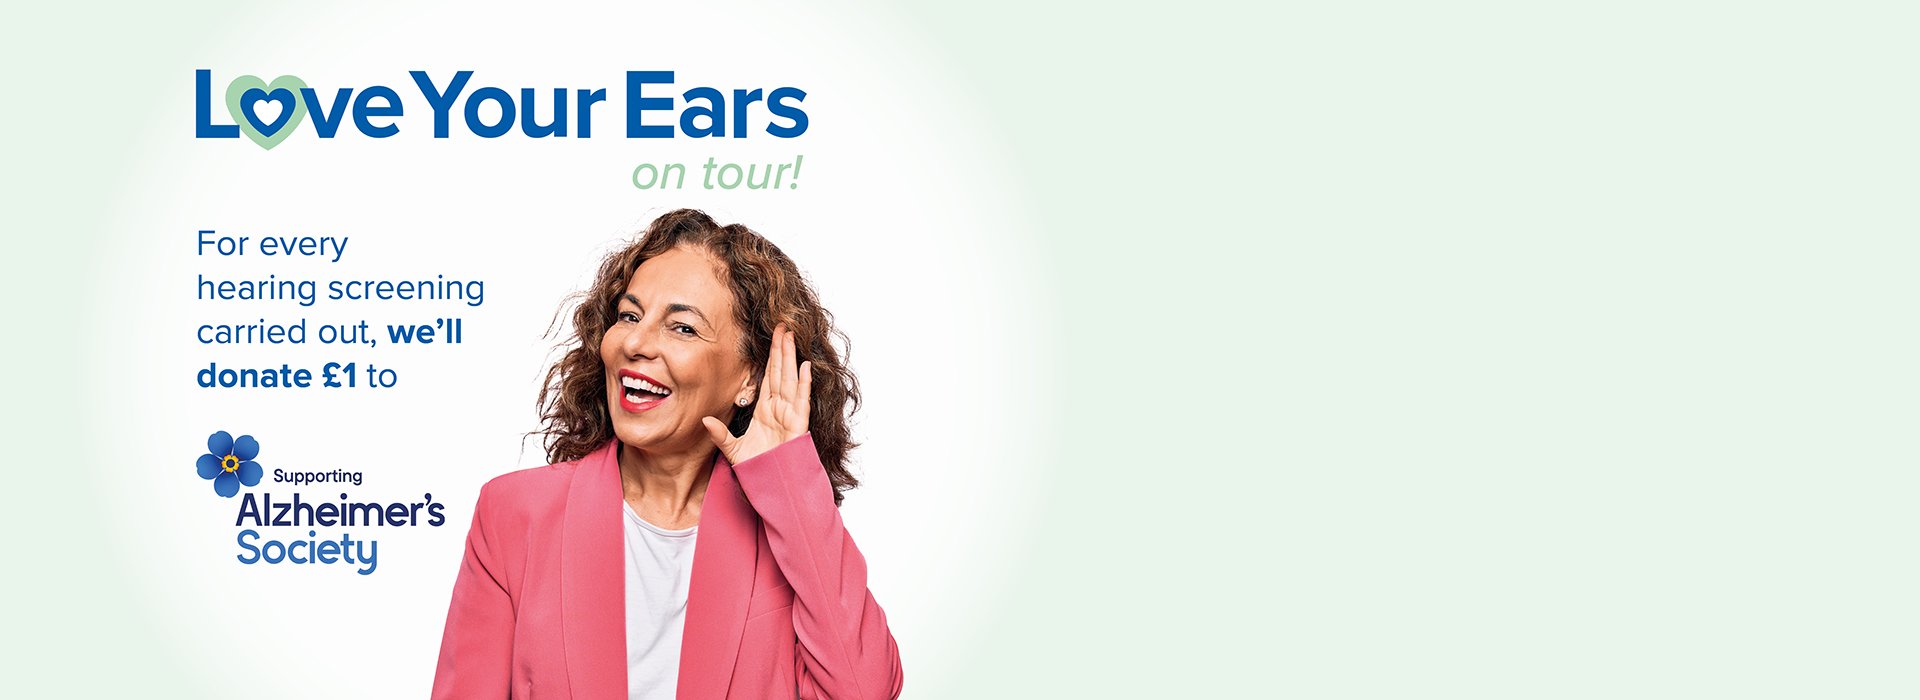 Image shows woman with headphone taking the online hearing test